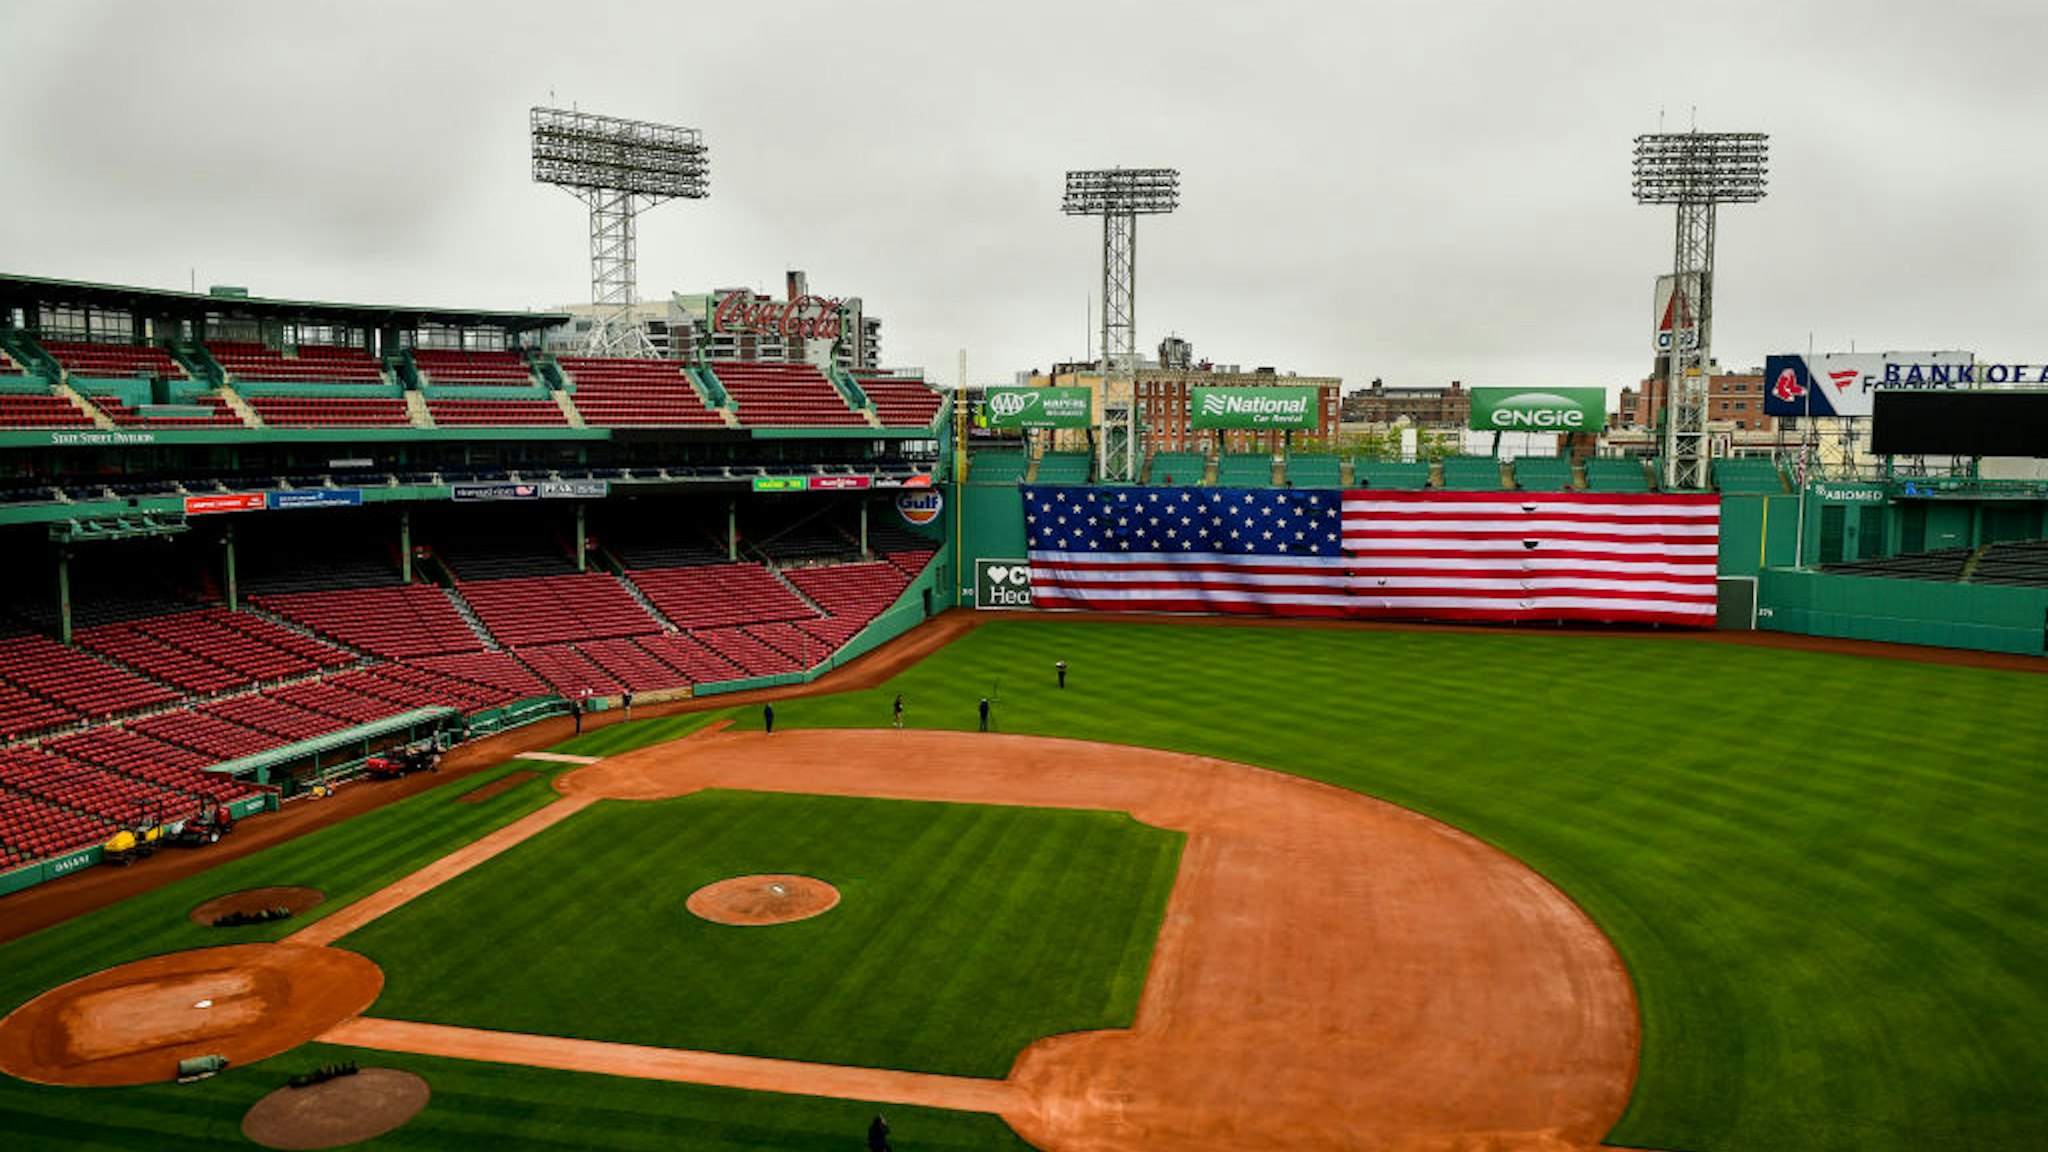 BOSTON, MA - MAY 25: The American flag is dropped over the Green Monster on Memorial Day as the Major League Baseball season is postponed due to the coronavirus pandemic on May 25, 2020 at Fenway Park in Boston, Massachusetts. (Photo by Billie Weiss/Boston Red Sox/Getty Images)